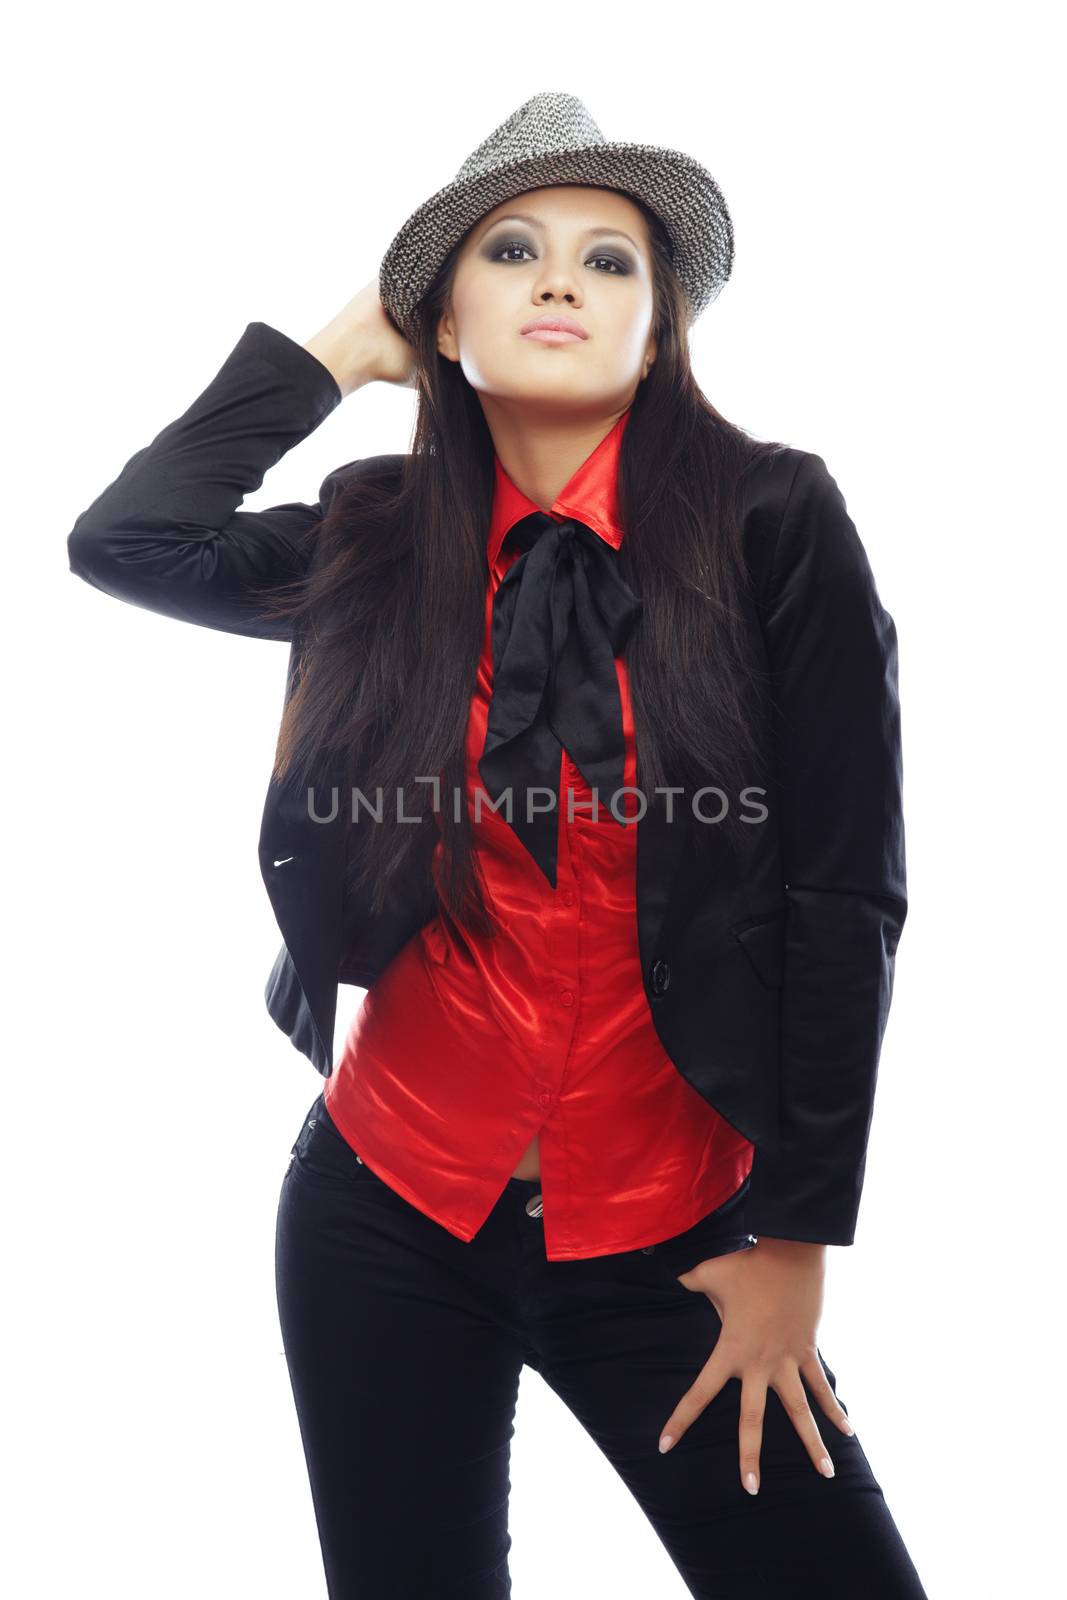 Retro styled lady in the red shirt and black costume on a white background